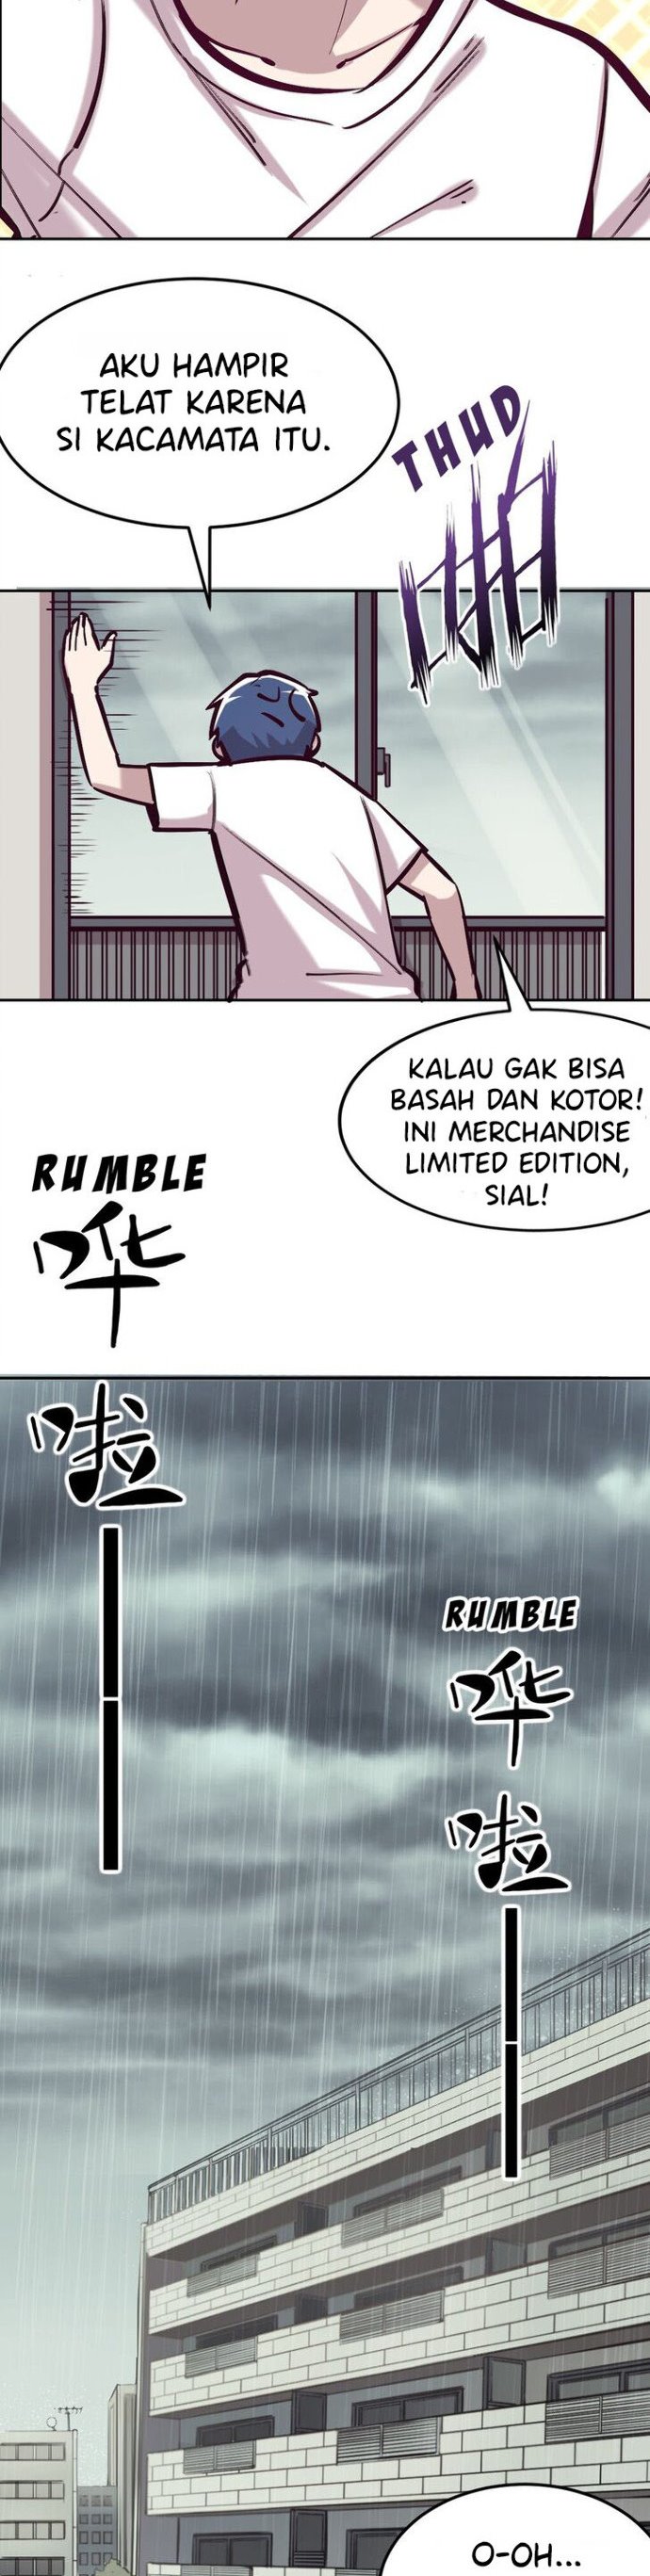 Demon X Angel, Can’t Get Along! Chapter 26